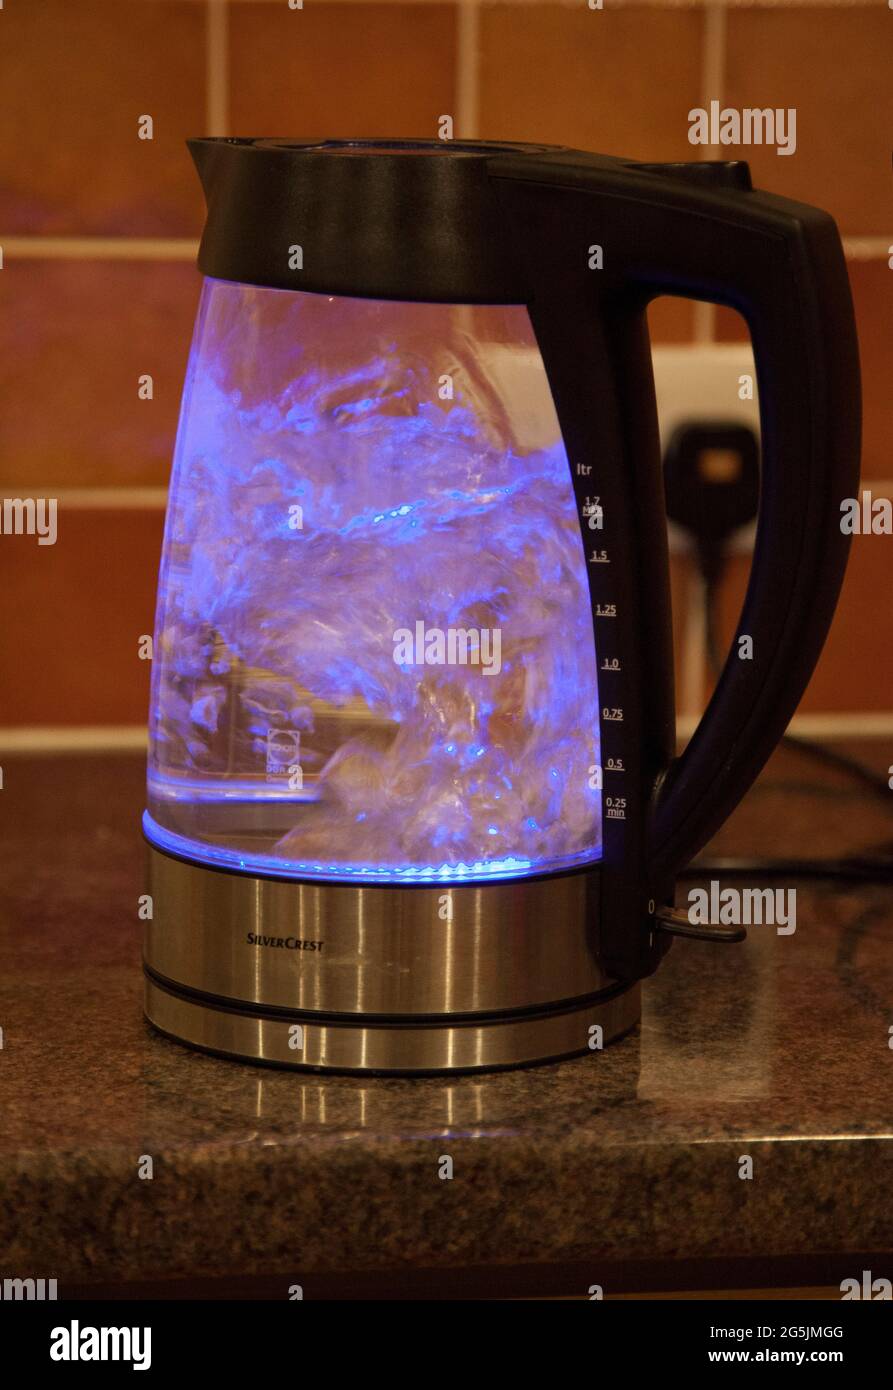 A see-through kettle boiling water, illuminated by a blue light inside Stock Photo